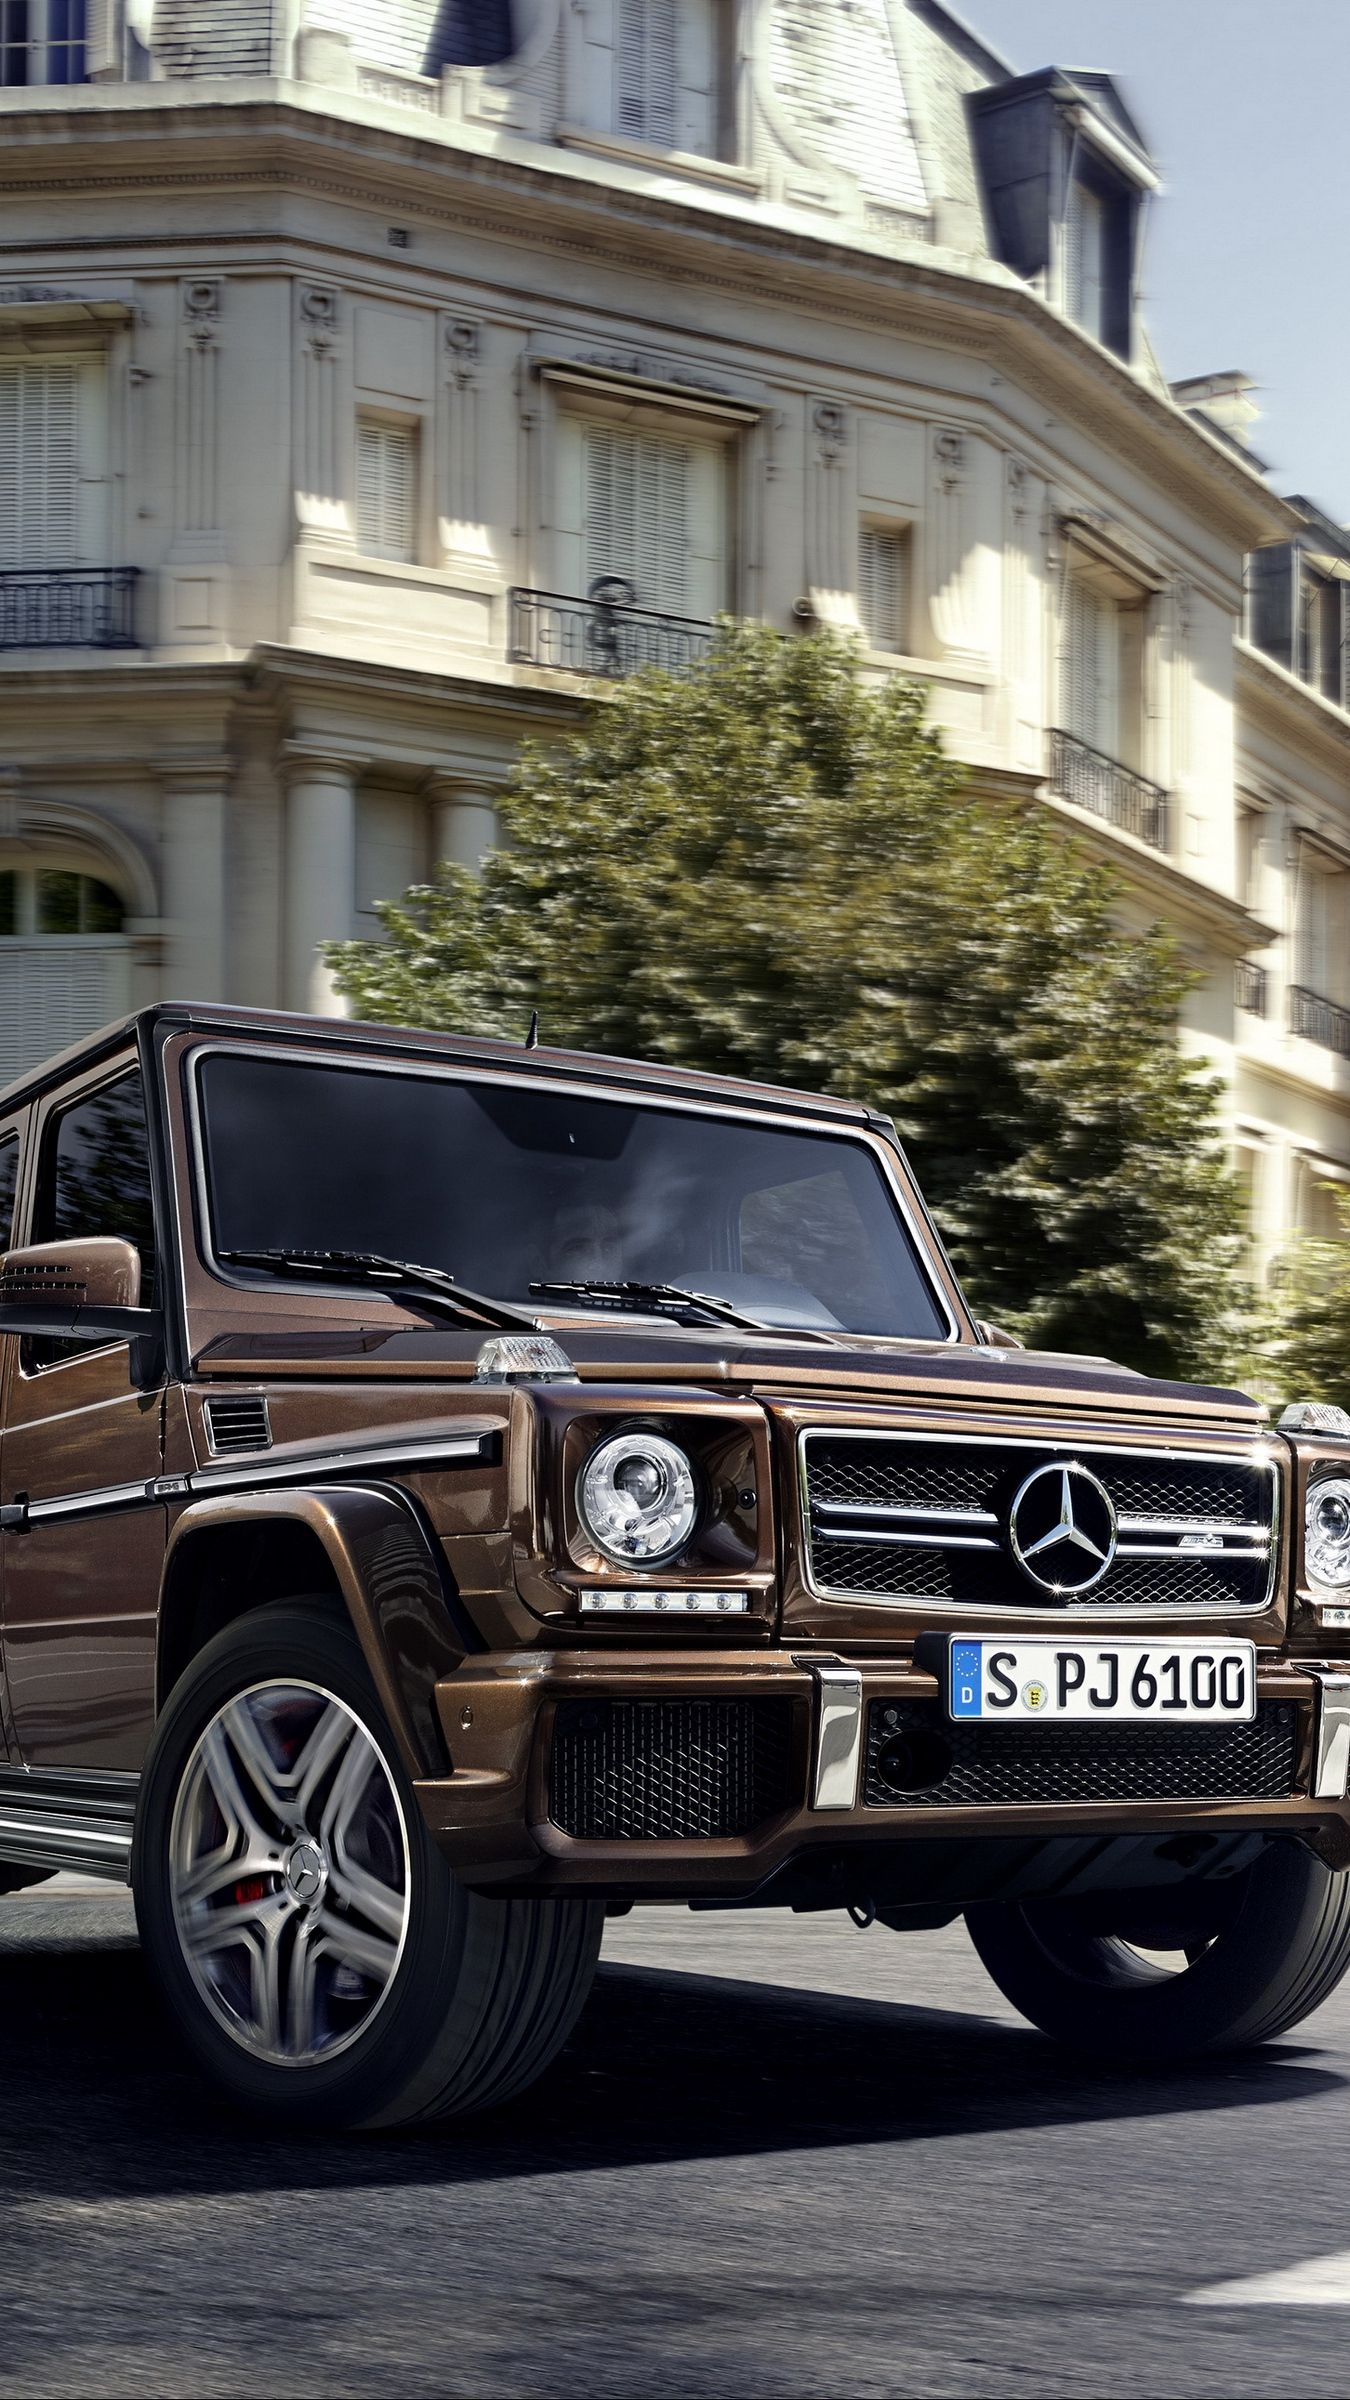 Mercedes G Wagon Iphone Wallpapers Top Free Mercedes G63